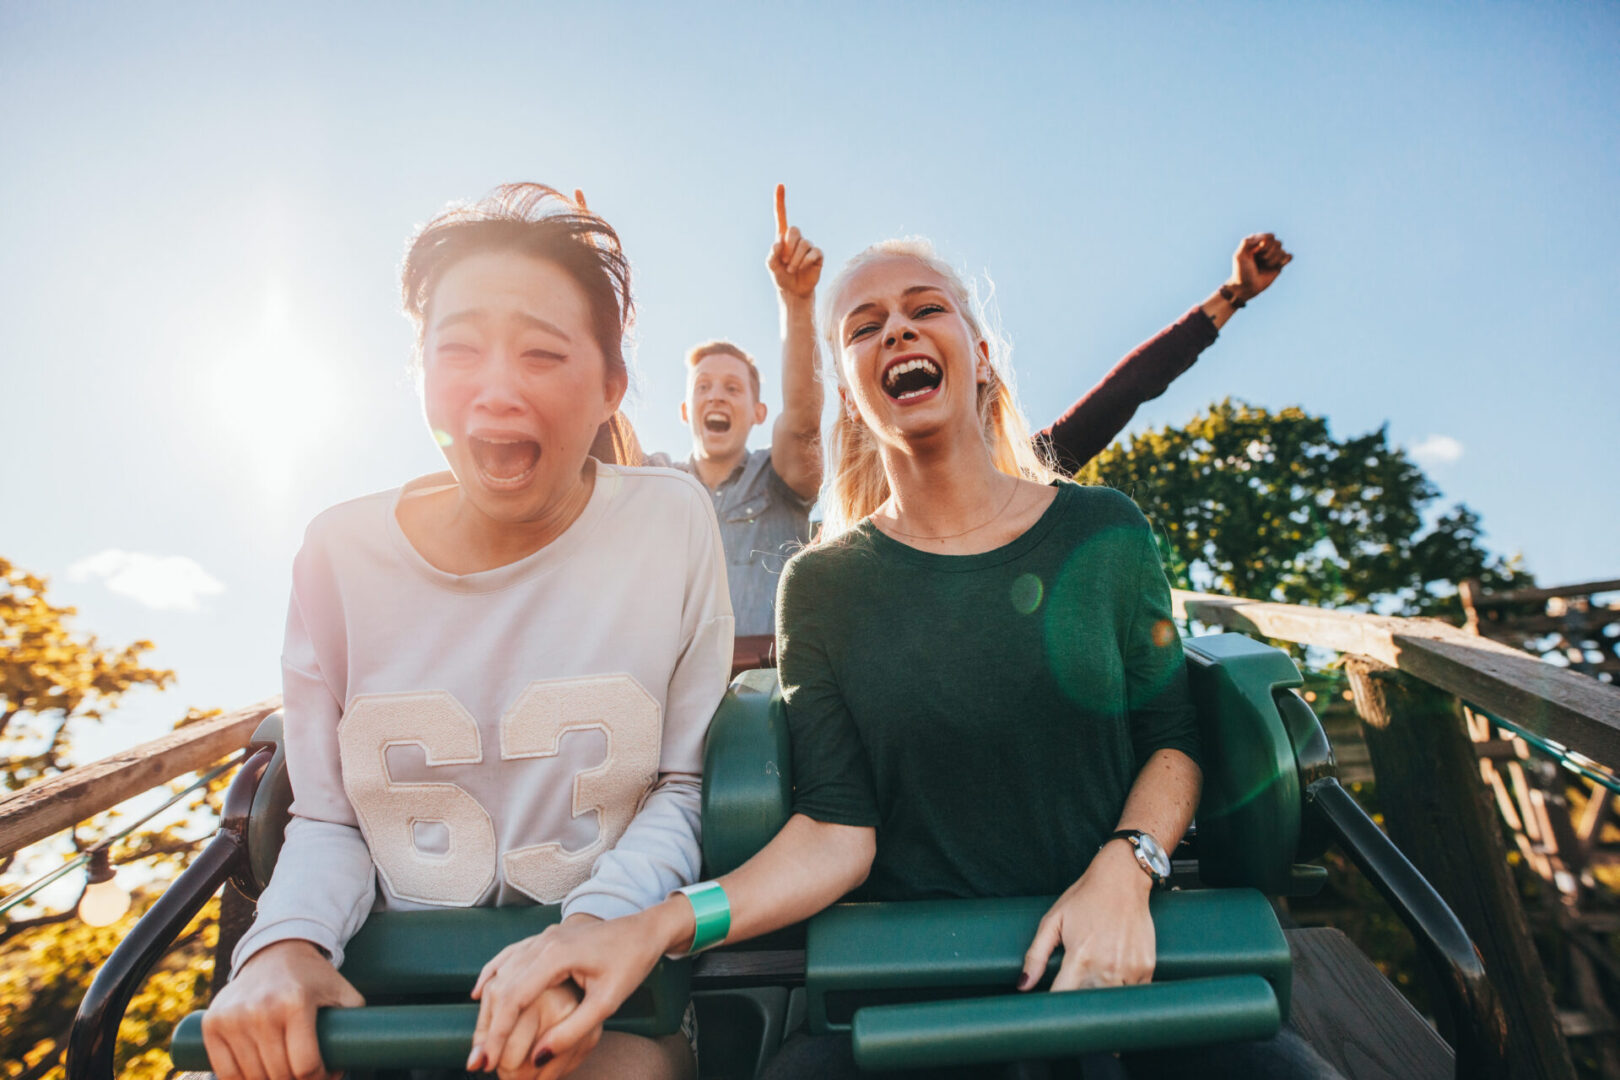 Two women and a man riding on the front of a roller coaster.